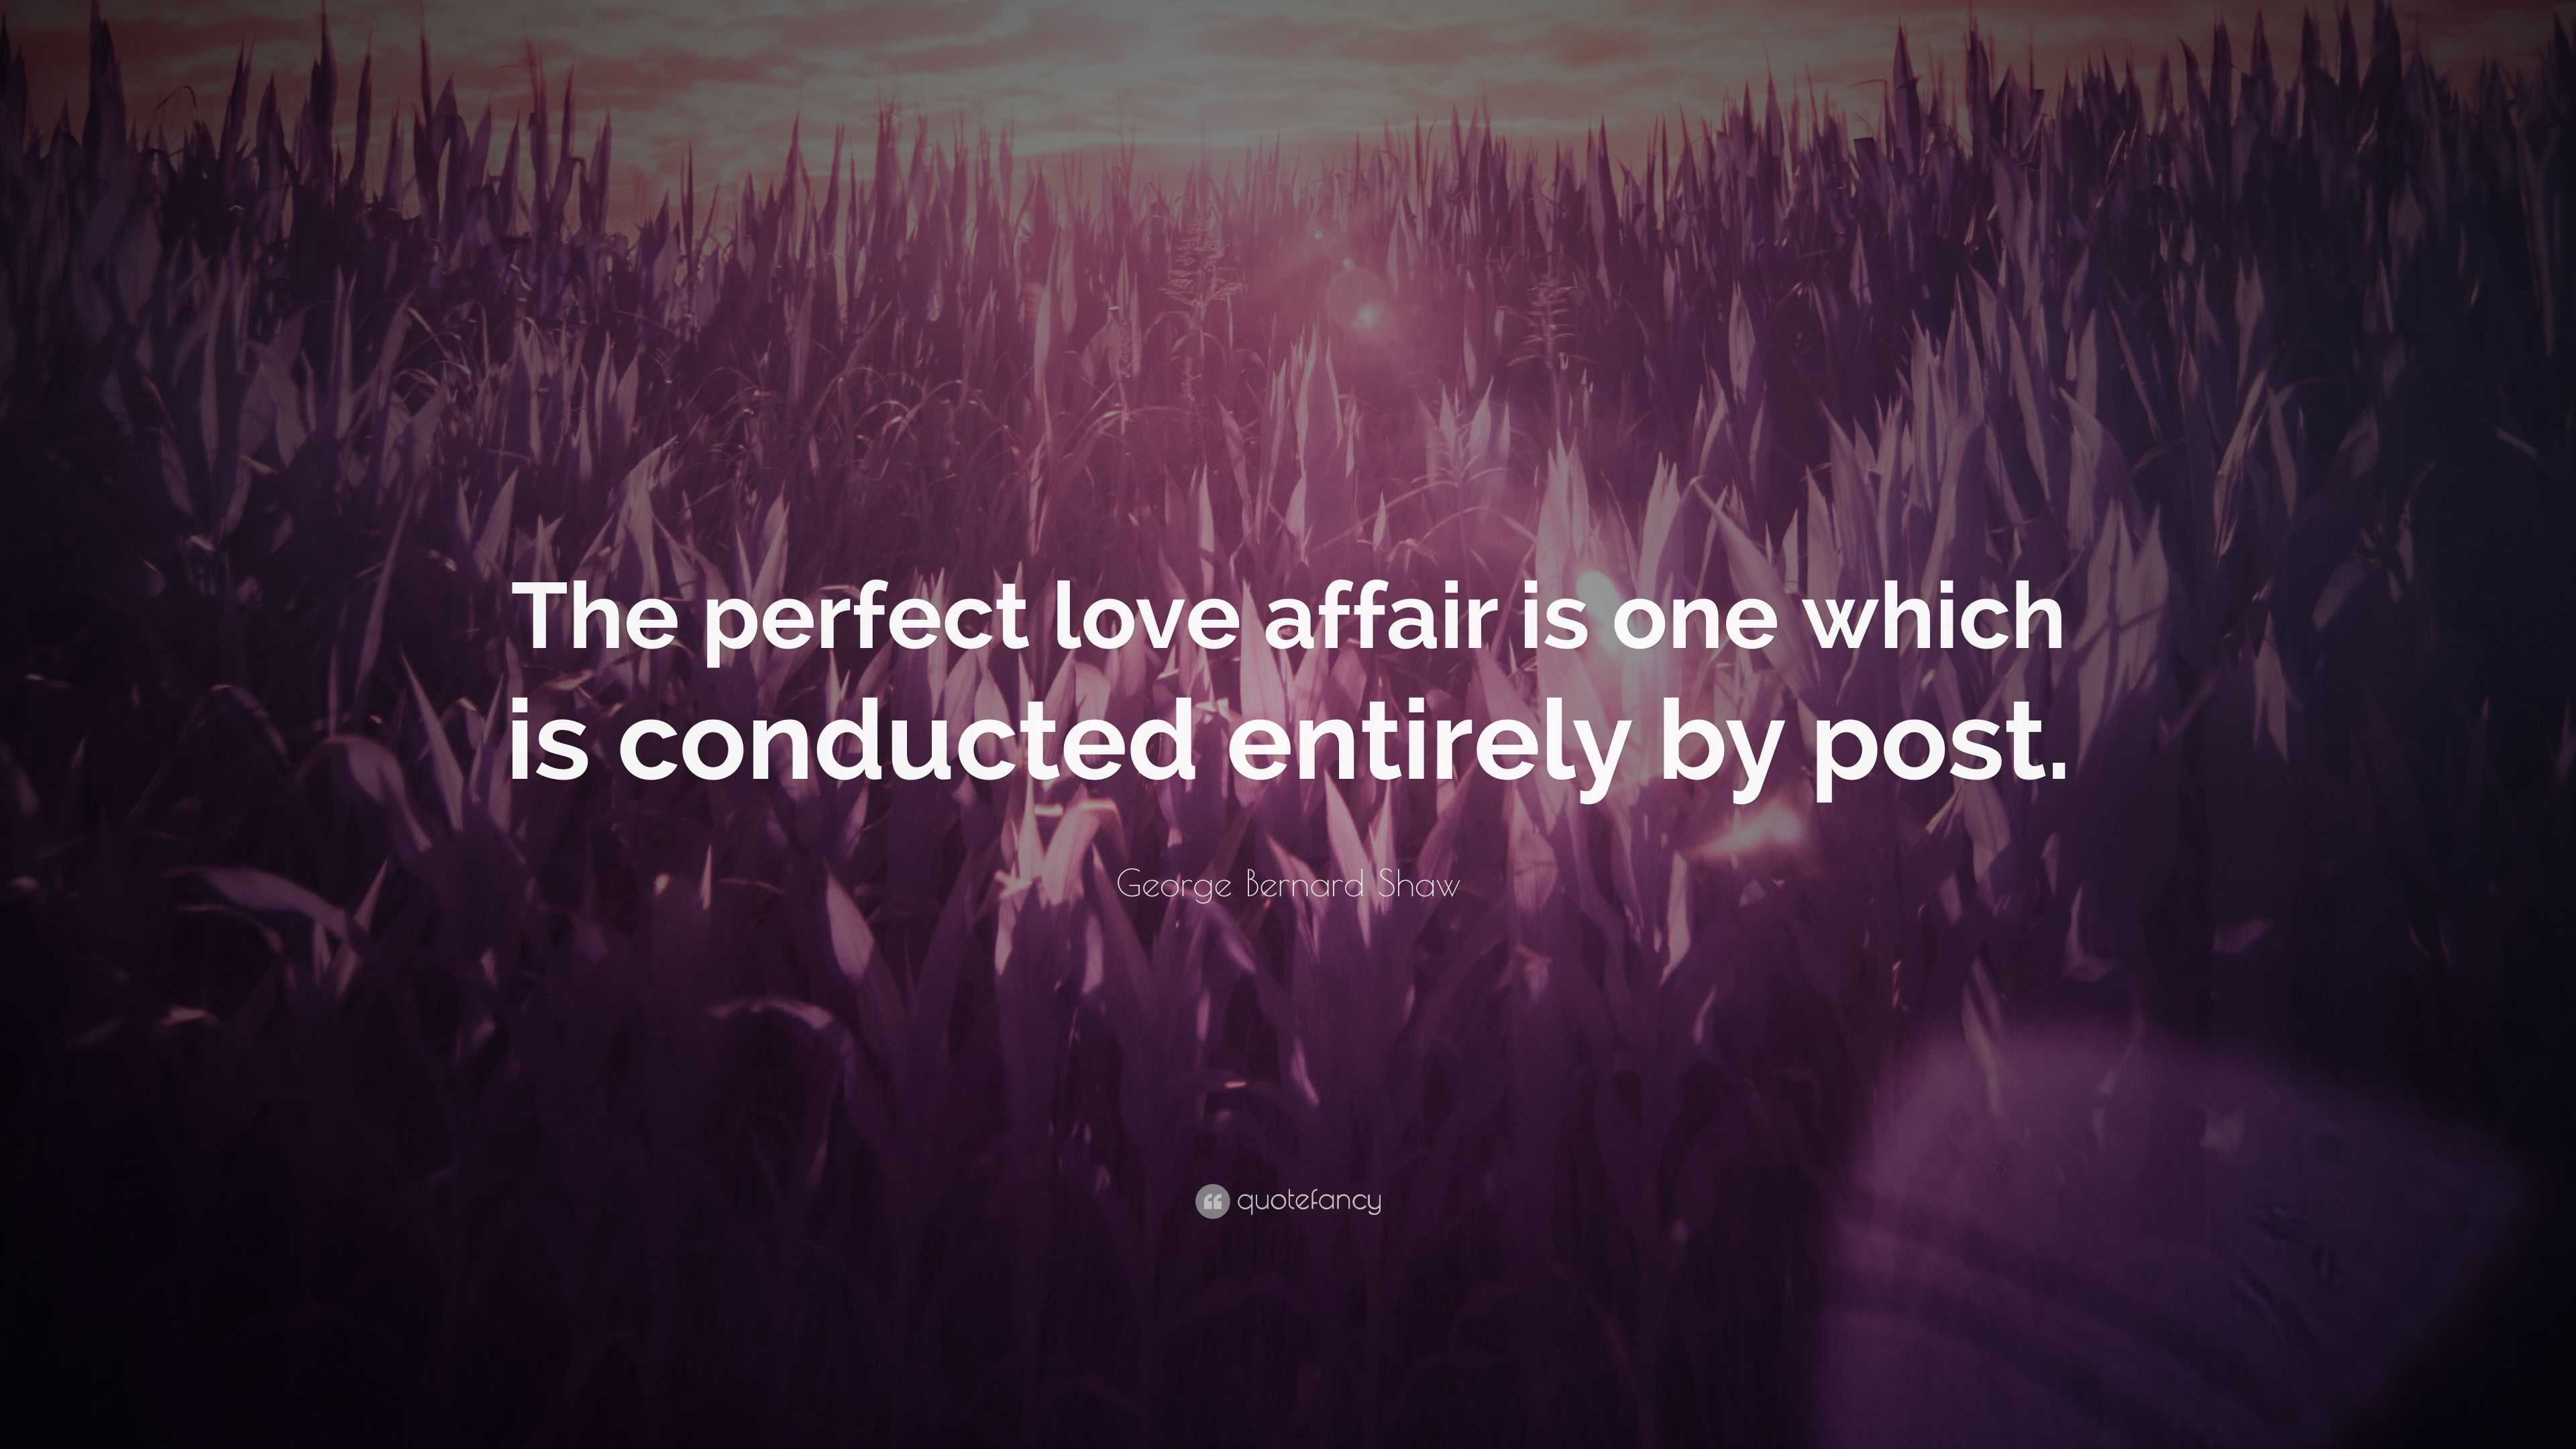 George Bernard Shaw Quote: “The perfect love affair is one which is ...